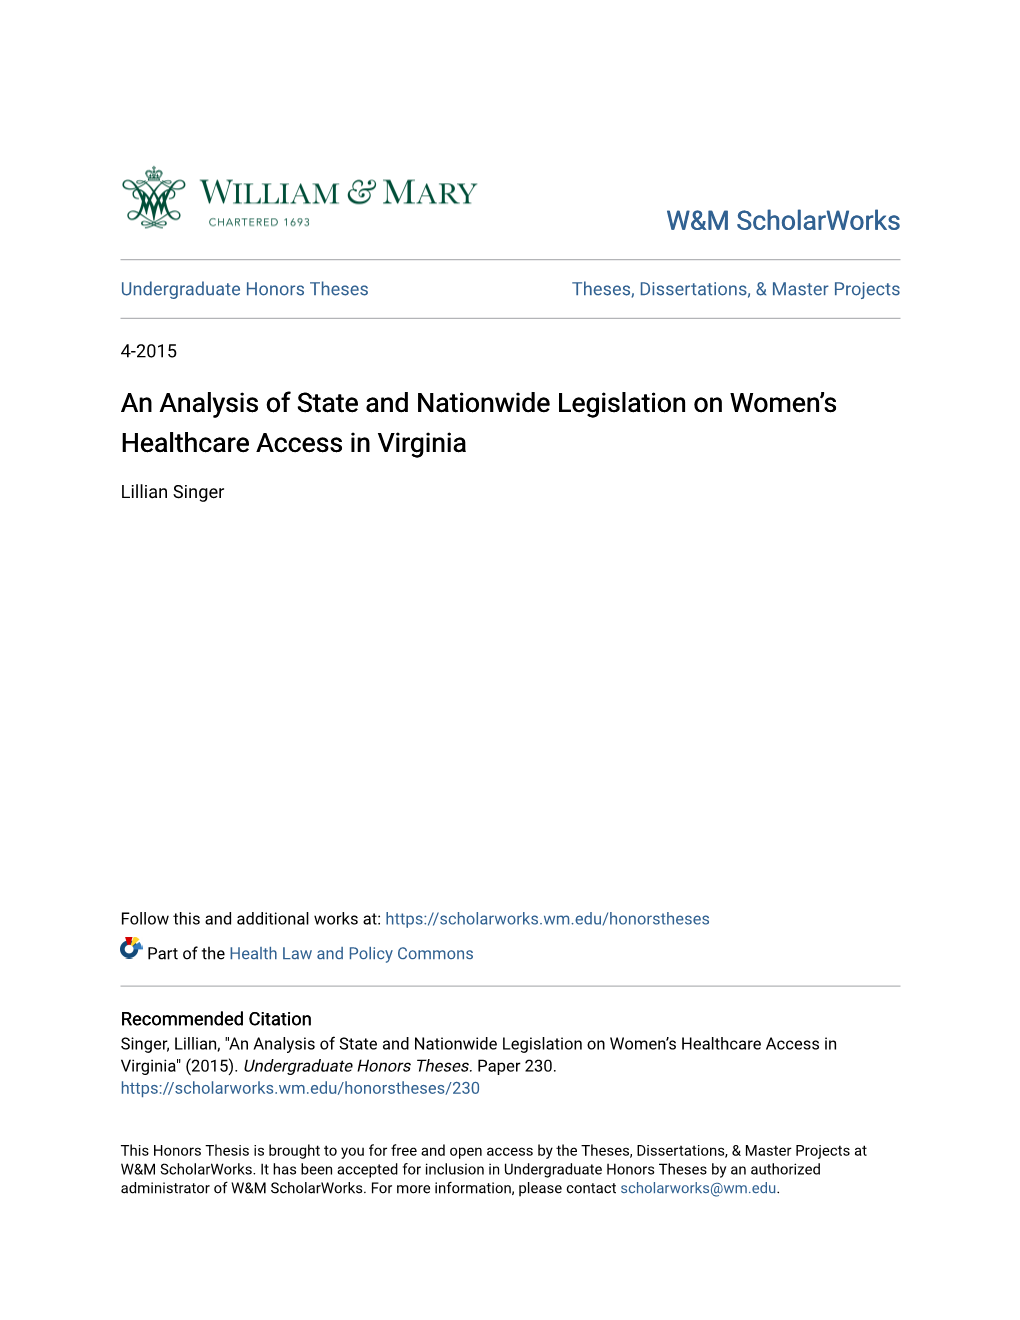 An Analysis of State and Nationwide Legislation on Women’S Healthcare Access in Virginia